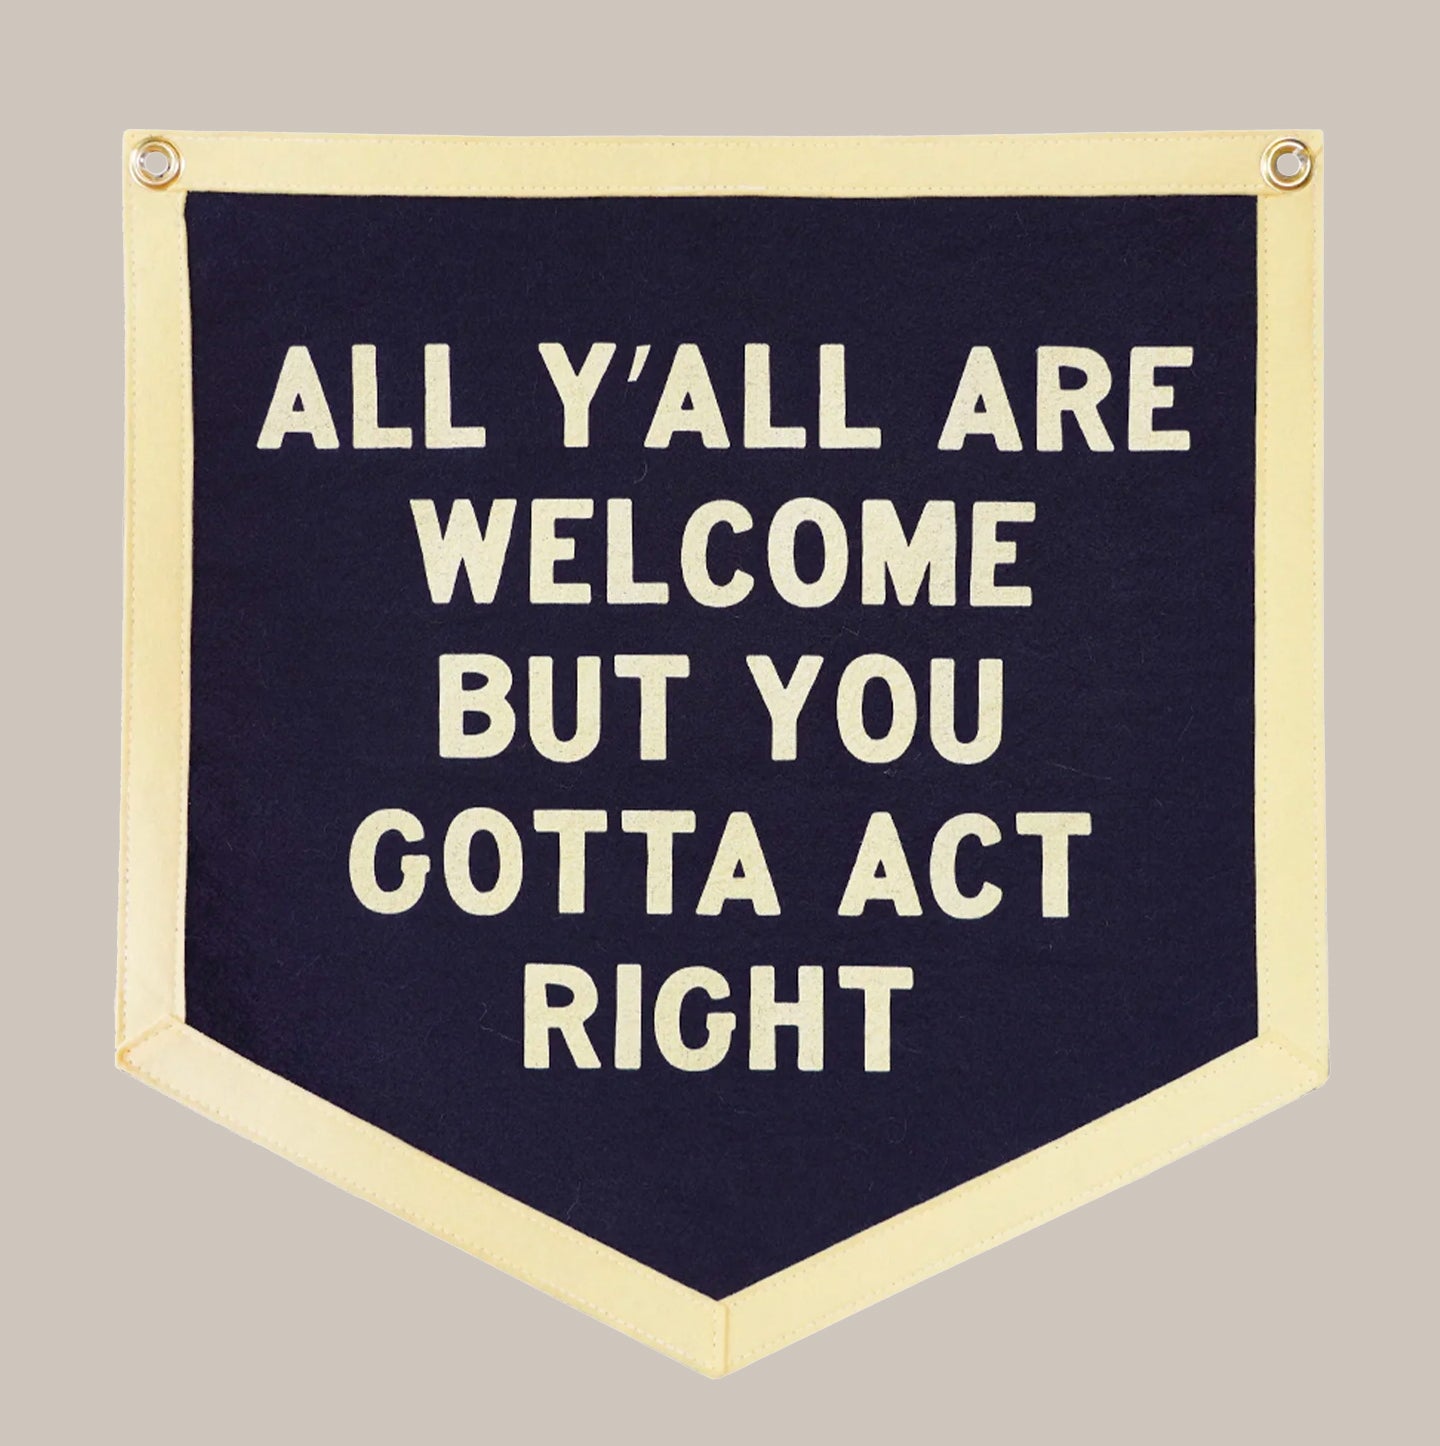 Oxford Pennant - All Y'all Are Welcome Camp Flag